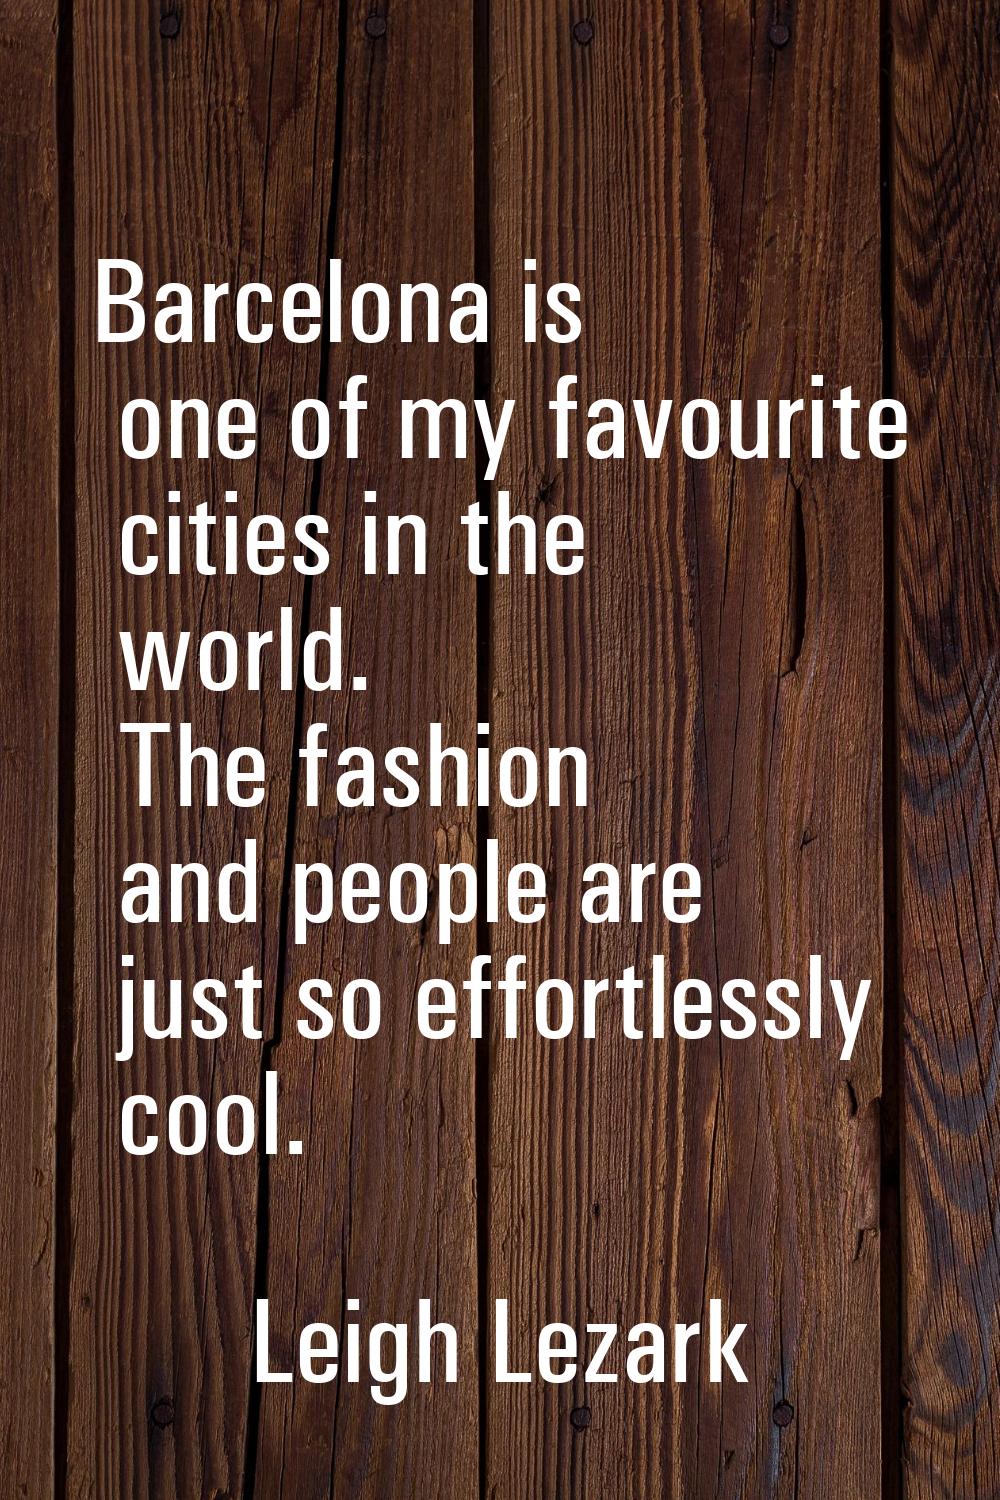 Barcelona is one of my favourite cities in the world. The fashion and people are just so effortless